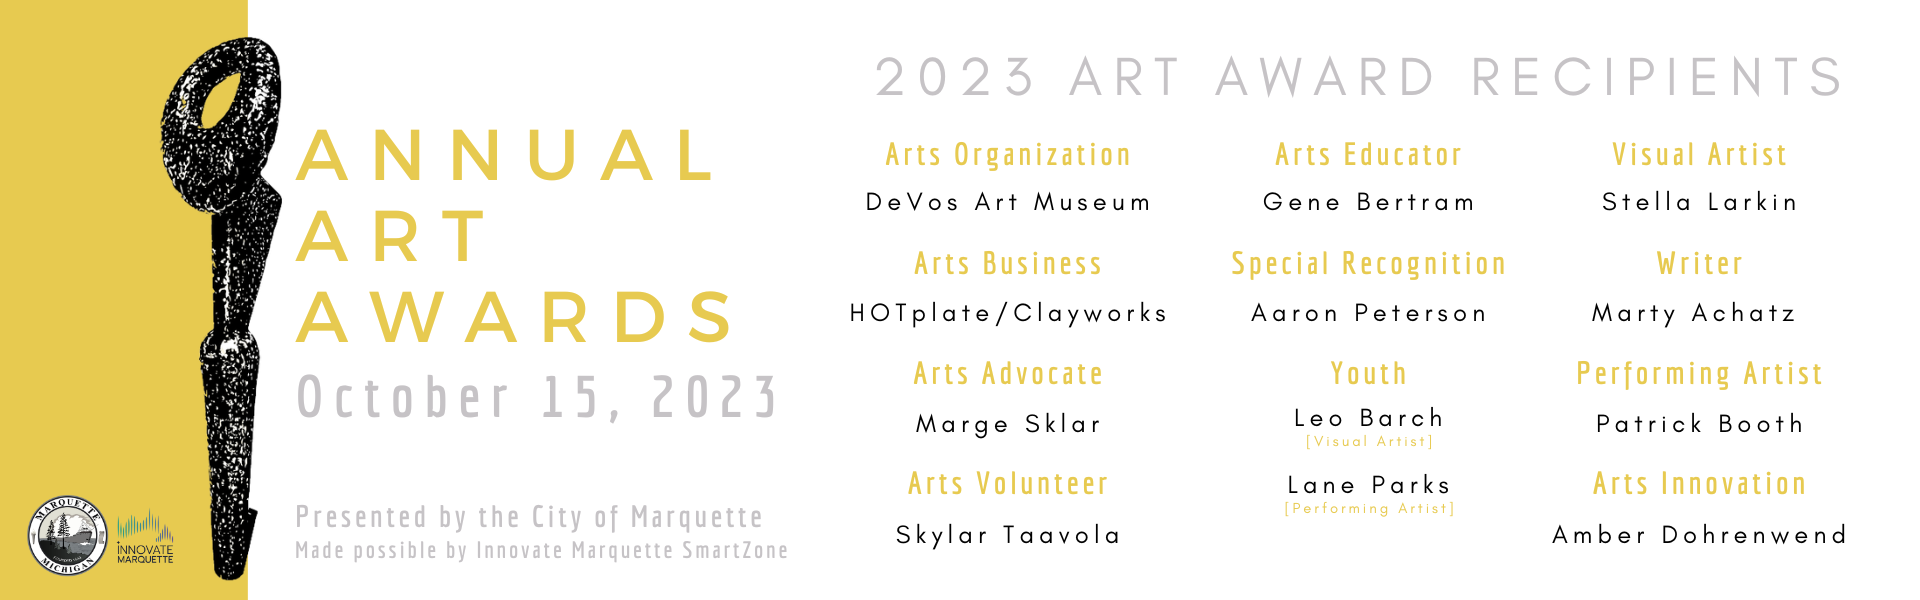 Arts Organization: DeVos Art Museum at Northern Michigan University Arts Business: HOTplate Pottery & Clayworks Arts Advocate: Marge Sklar (Dance Zone Marquette) Arts Innovation: Amber Dohrenwend Arts Volunteer: Skylar Taavola Arts Educator: Gene Bertram Writer of the Year: Marty Achatz Performing Artist of the Year: Patrick Booth Visual Artist of the Year: Stella Larkin Special Recognition: Aaron Peterson (Aaron Peterson Studios) Youth Visual Artist of the Year: Leo Barch Youth Performing Artist of the Year: Lane Parks